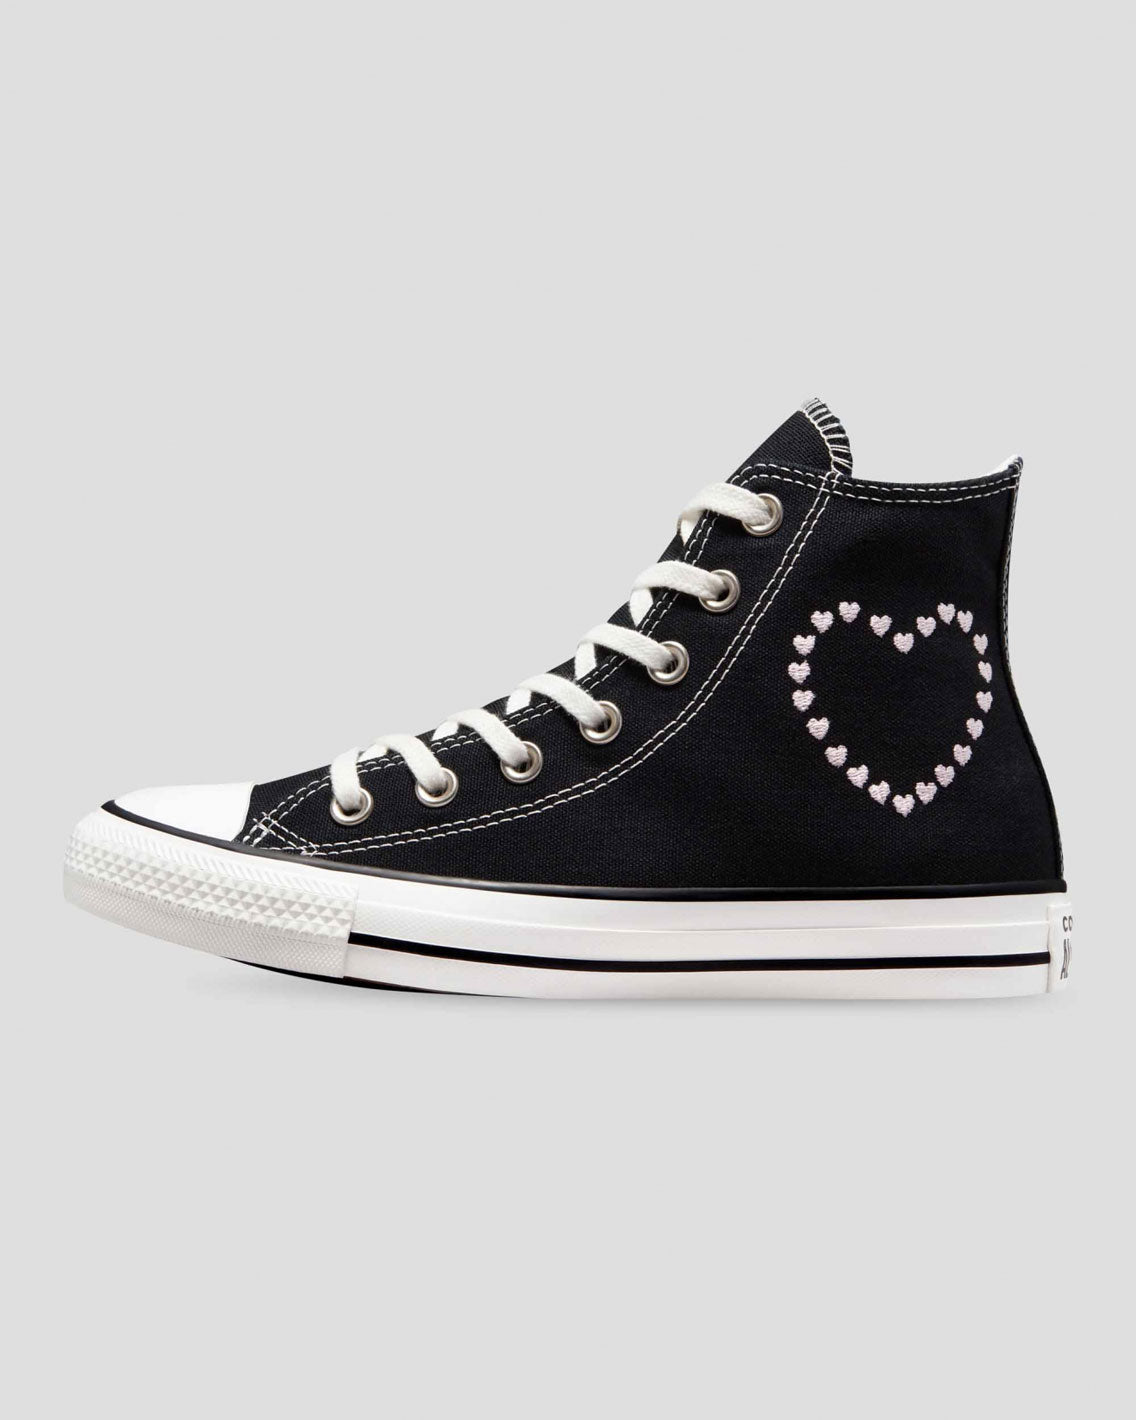 Converse - CT Crafted With Love HI - Black / Vintage / Cherry